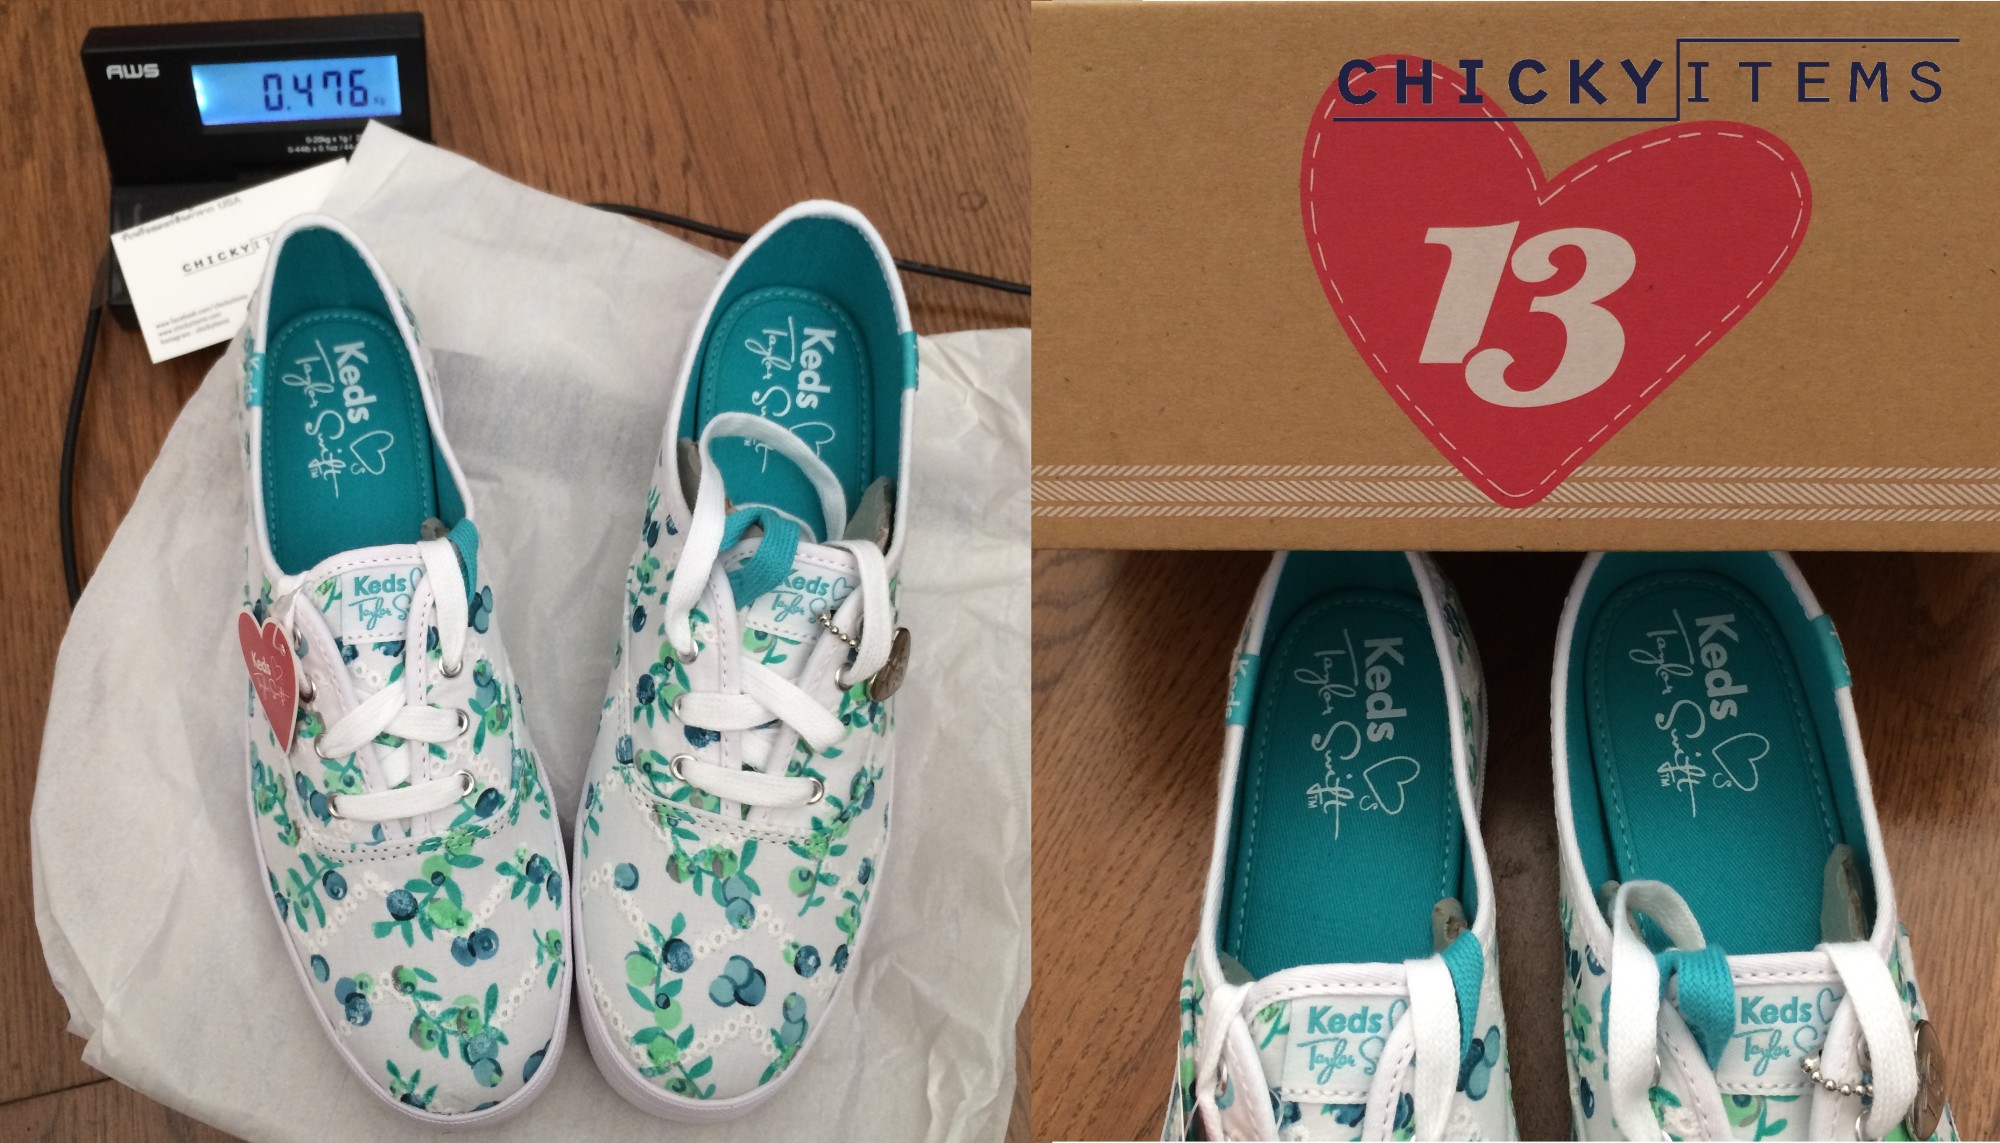 Keds Taylor Swift collection